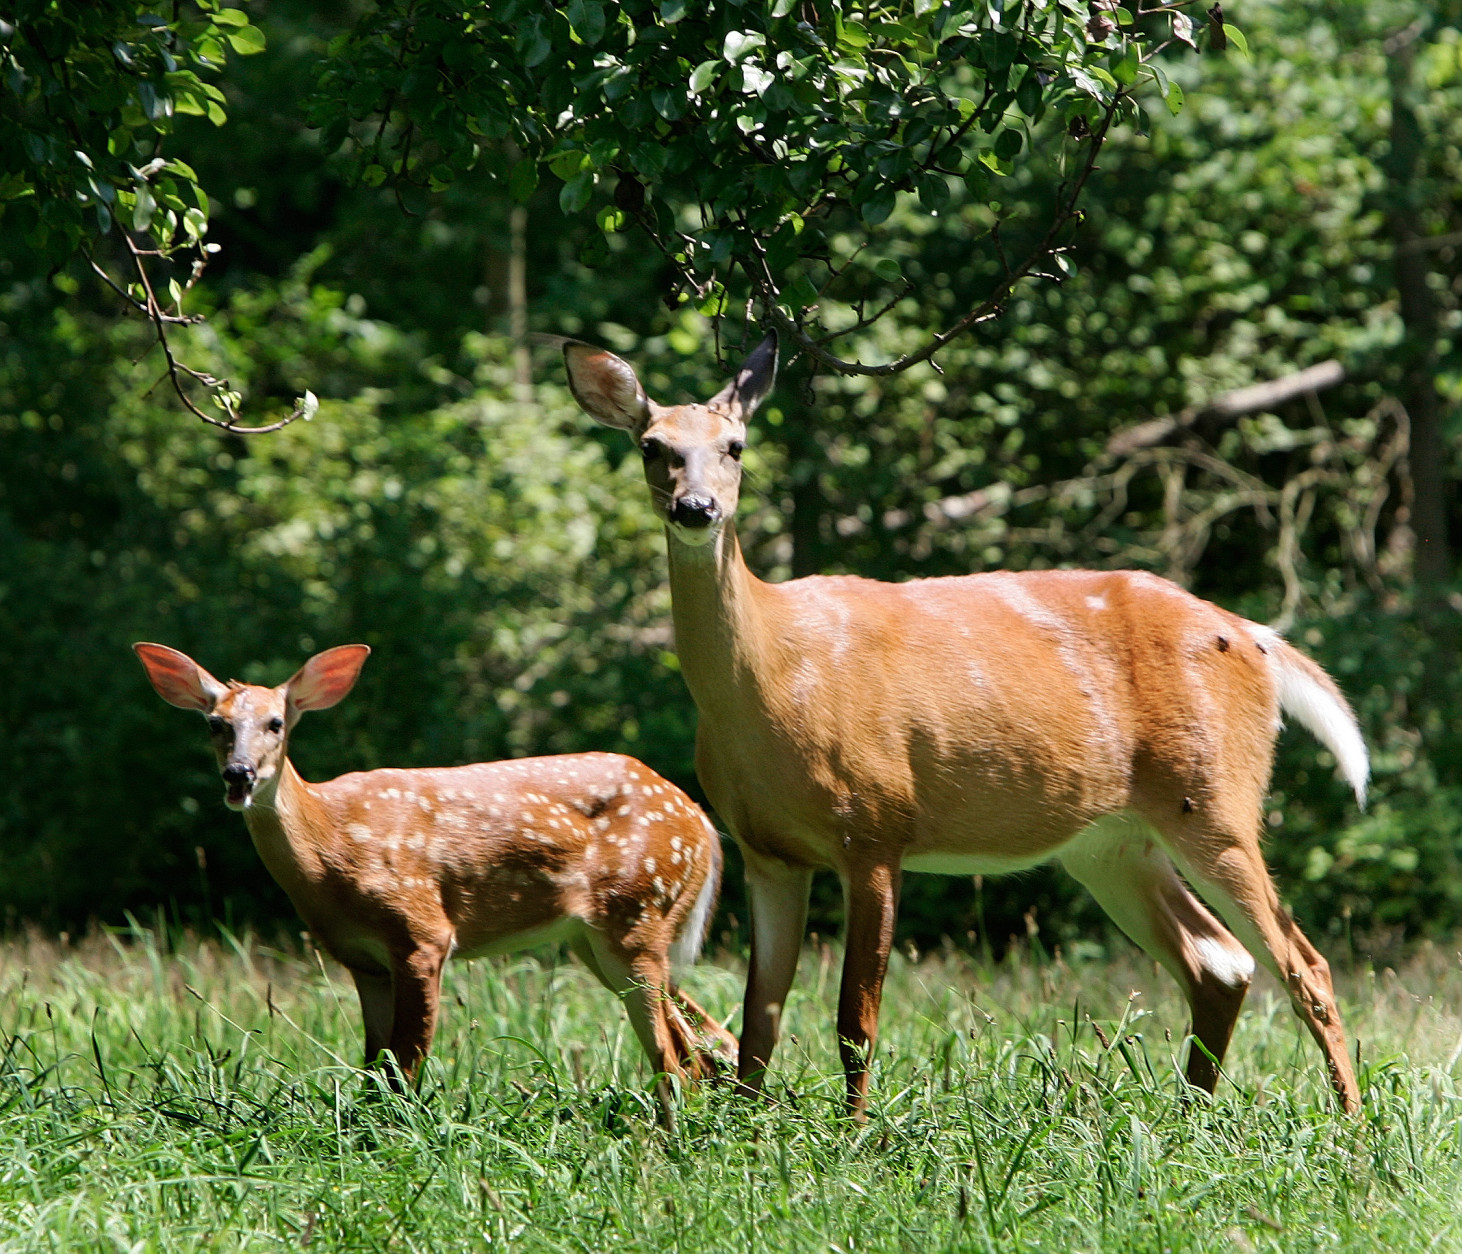 A mother deer and her young fawn graze in the high grasses of a yard in Moreland Hills, Ohio on Wednesday, Aug. 2, 2006.  (AP Photo/Amy Sancetta)